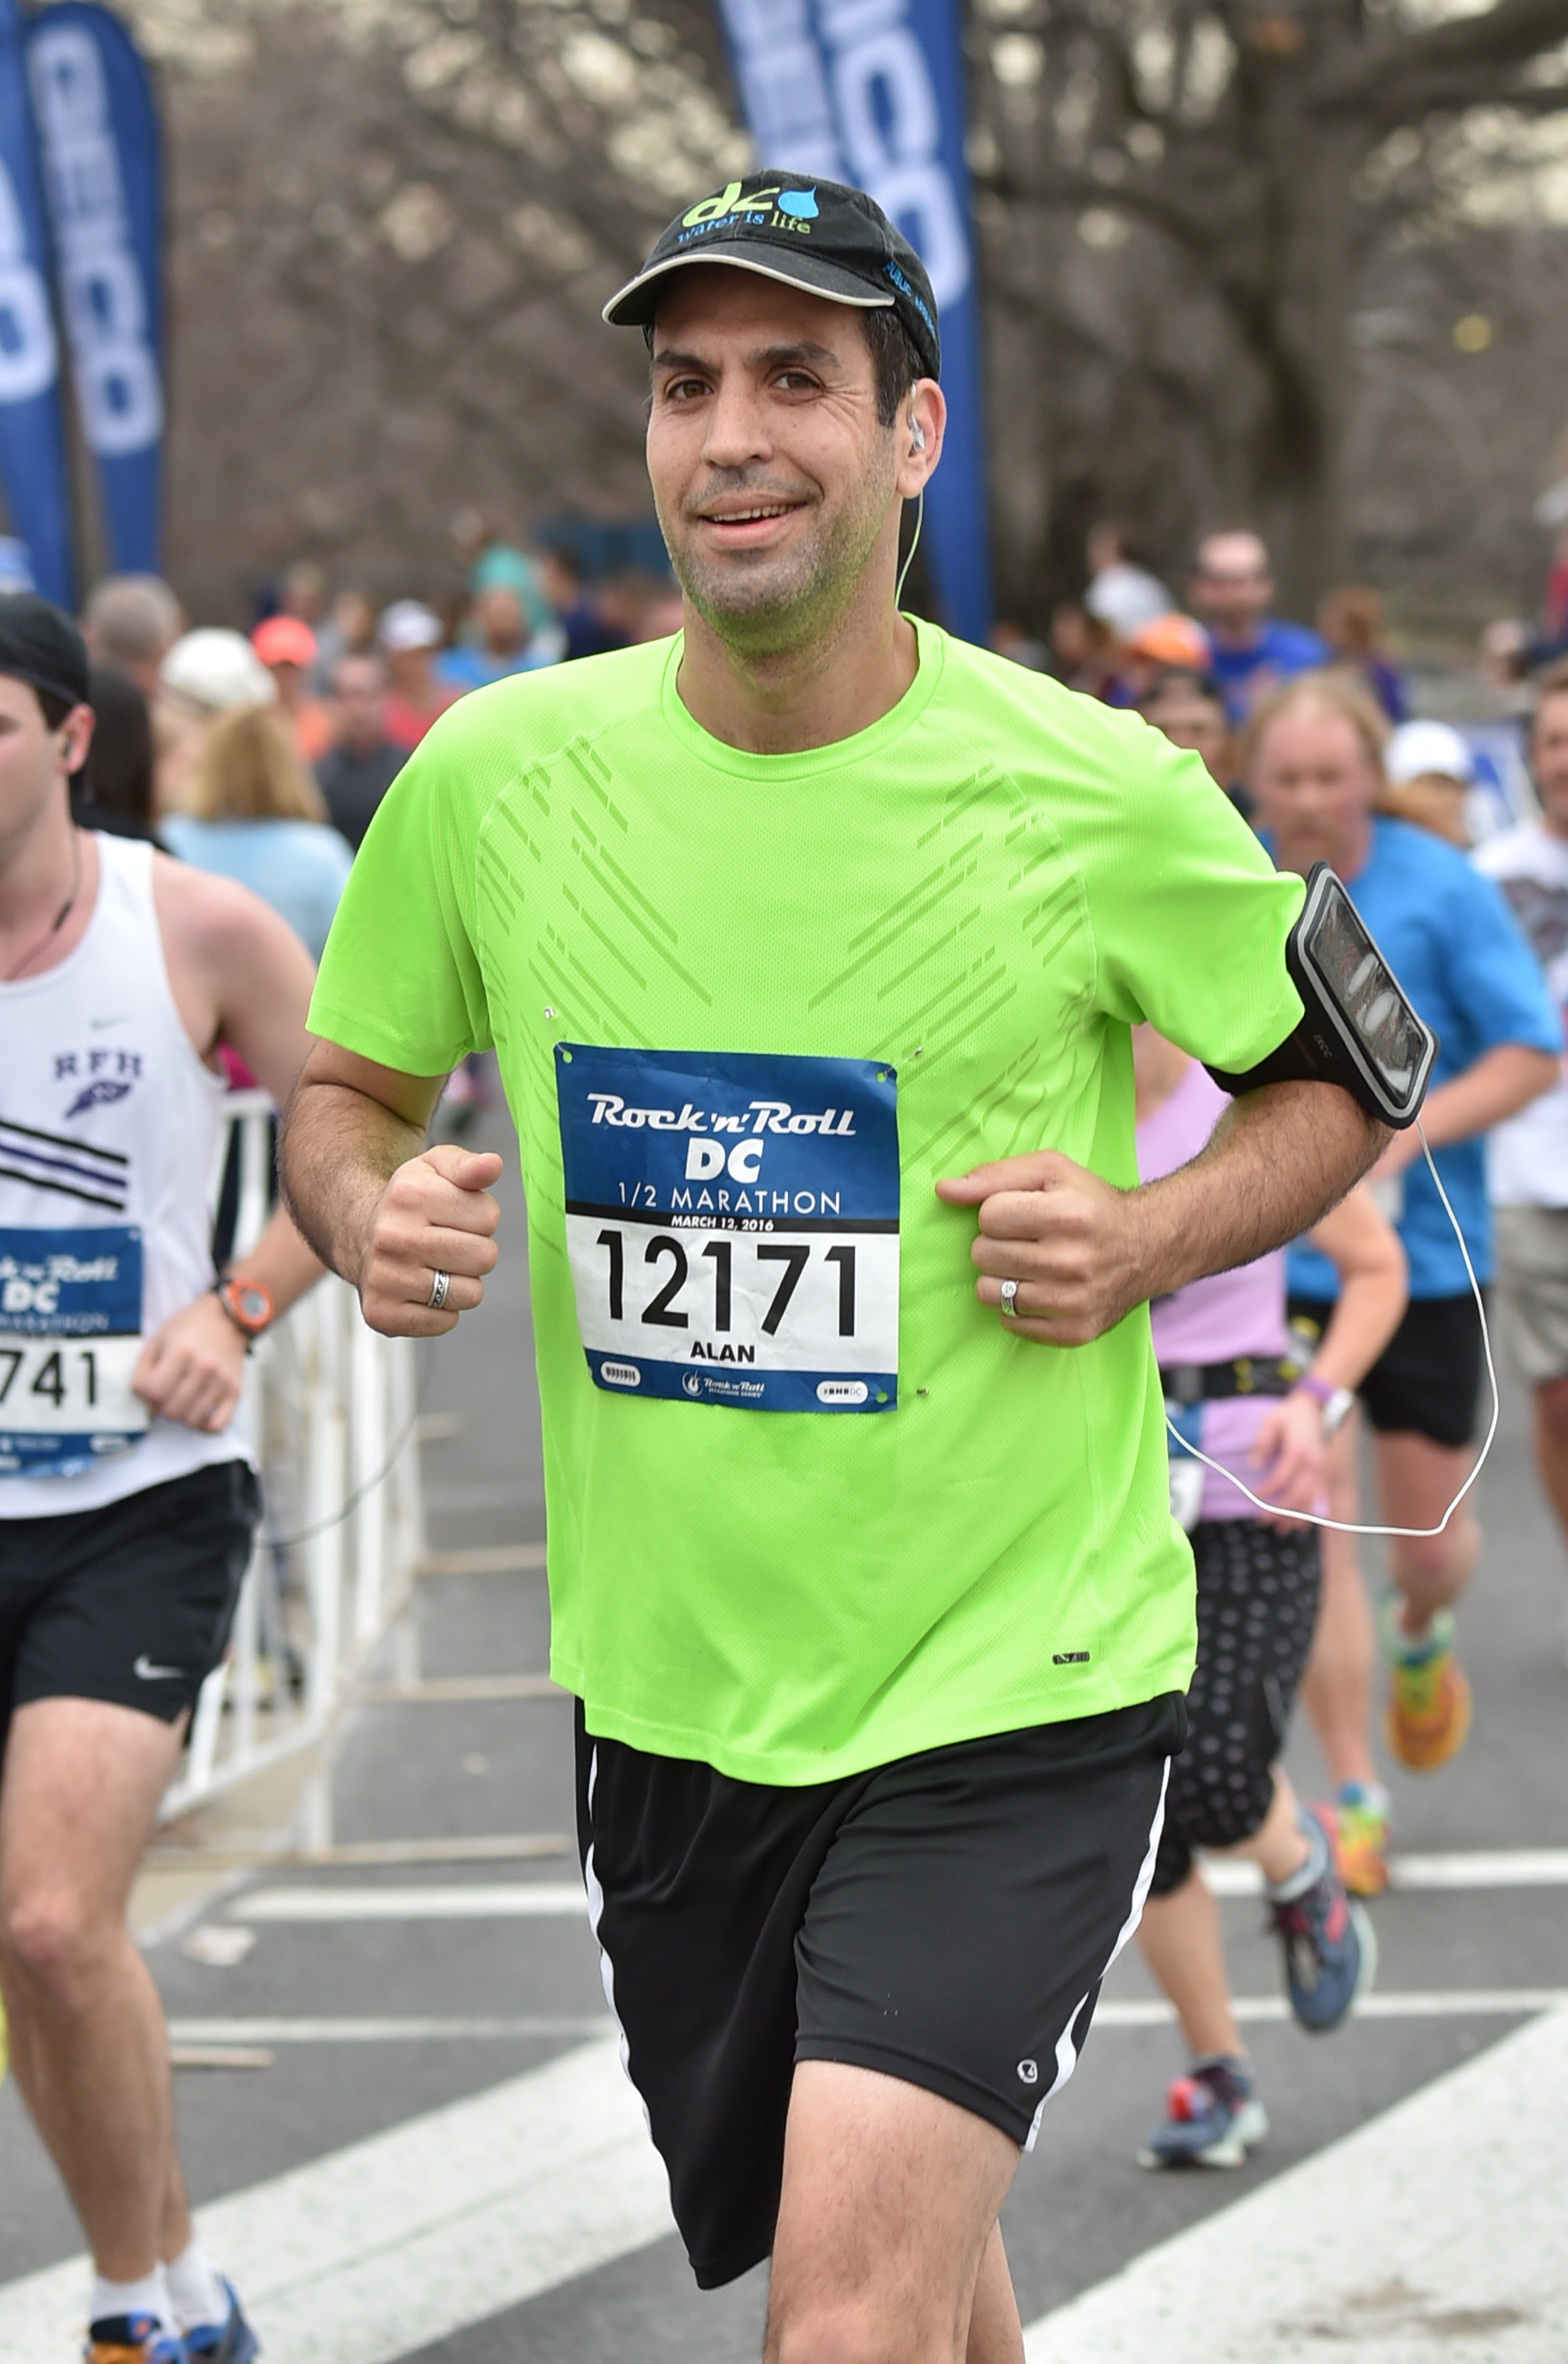 Alan among other runners in the Rock'n'Roll 1/2 Marathon.